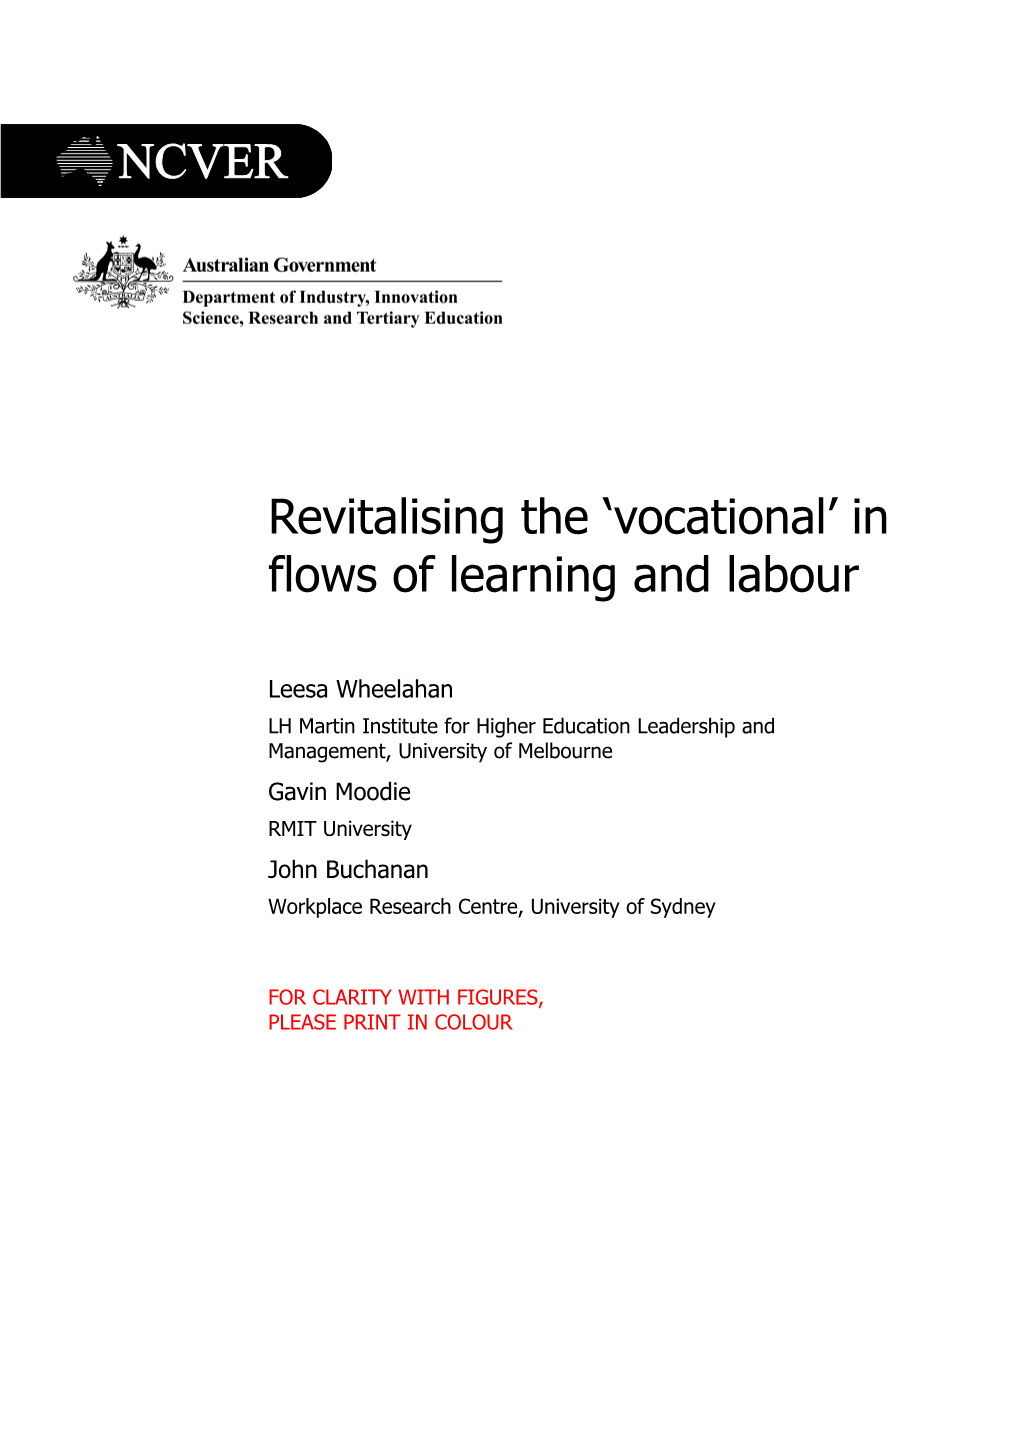 Revitalising the Vocational in Flows of Learning and Labour